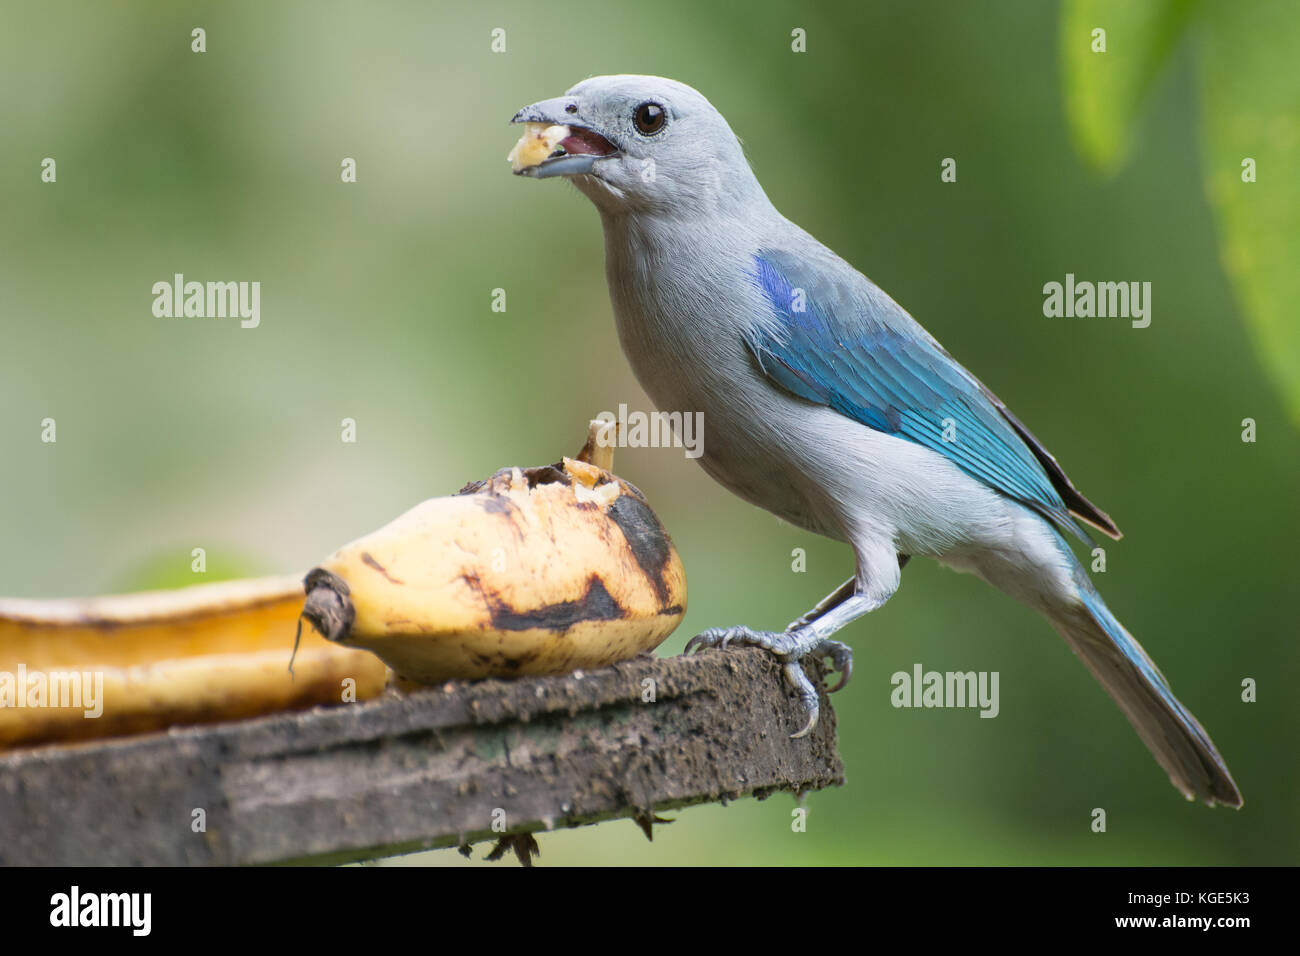 A blue gray tanager eats banana laid out on a platform in Ecuador. Stock Photo